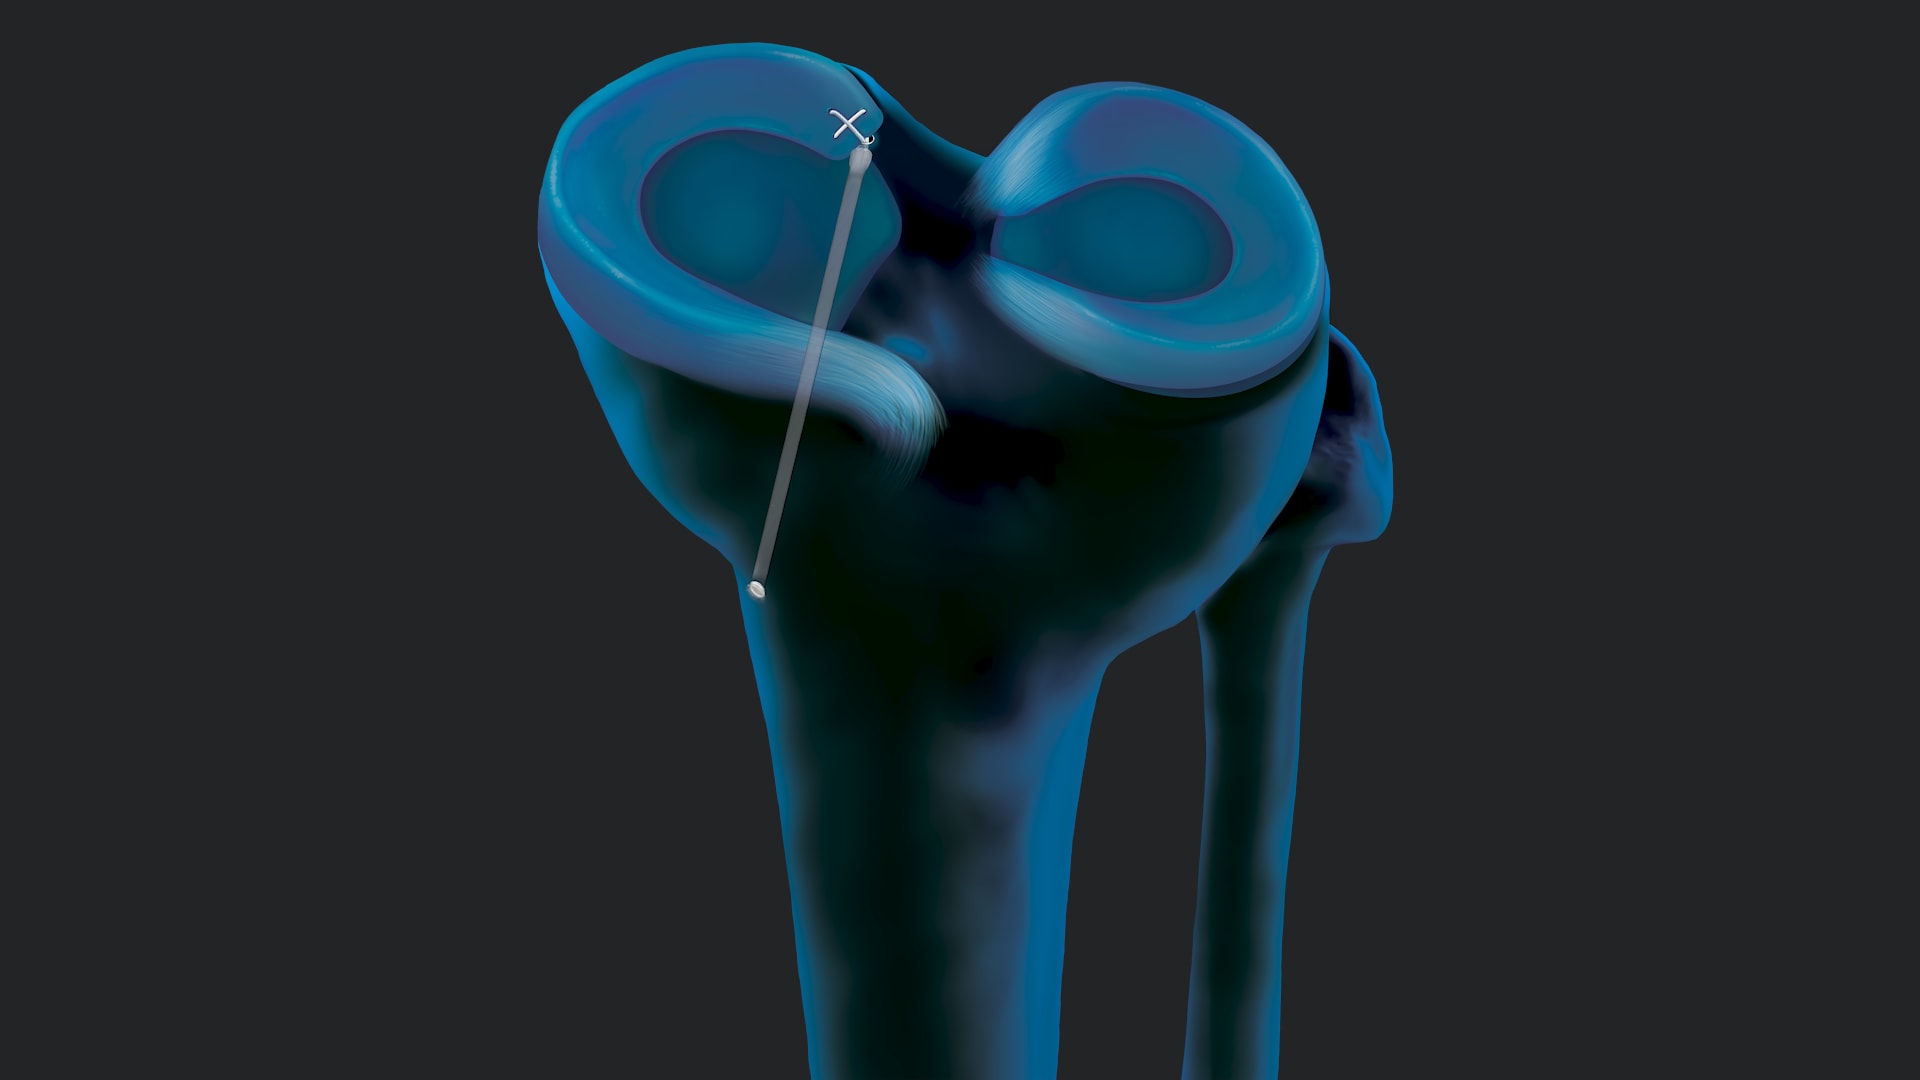 Medial Meniscus Root Repair Using the SutureLoc™ Implant: Early Outcomes and Clinical Rationale